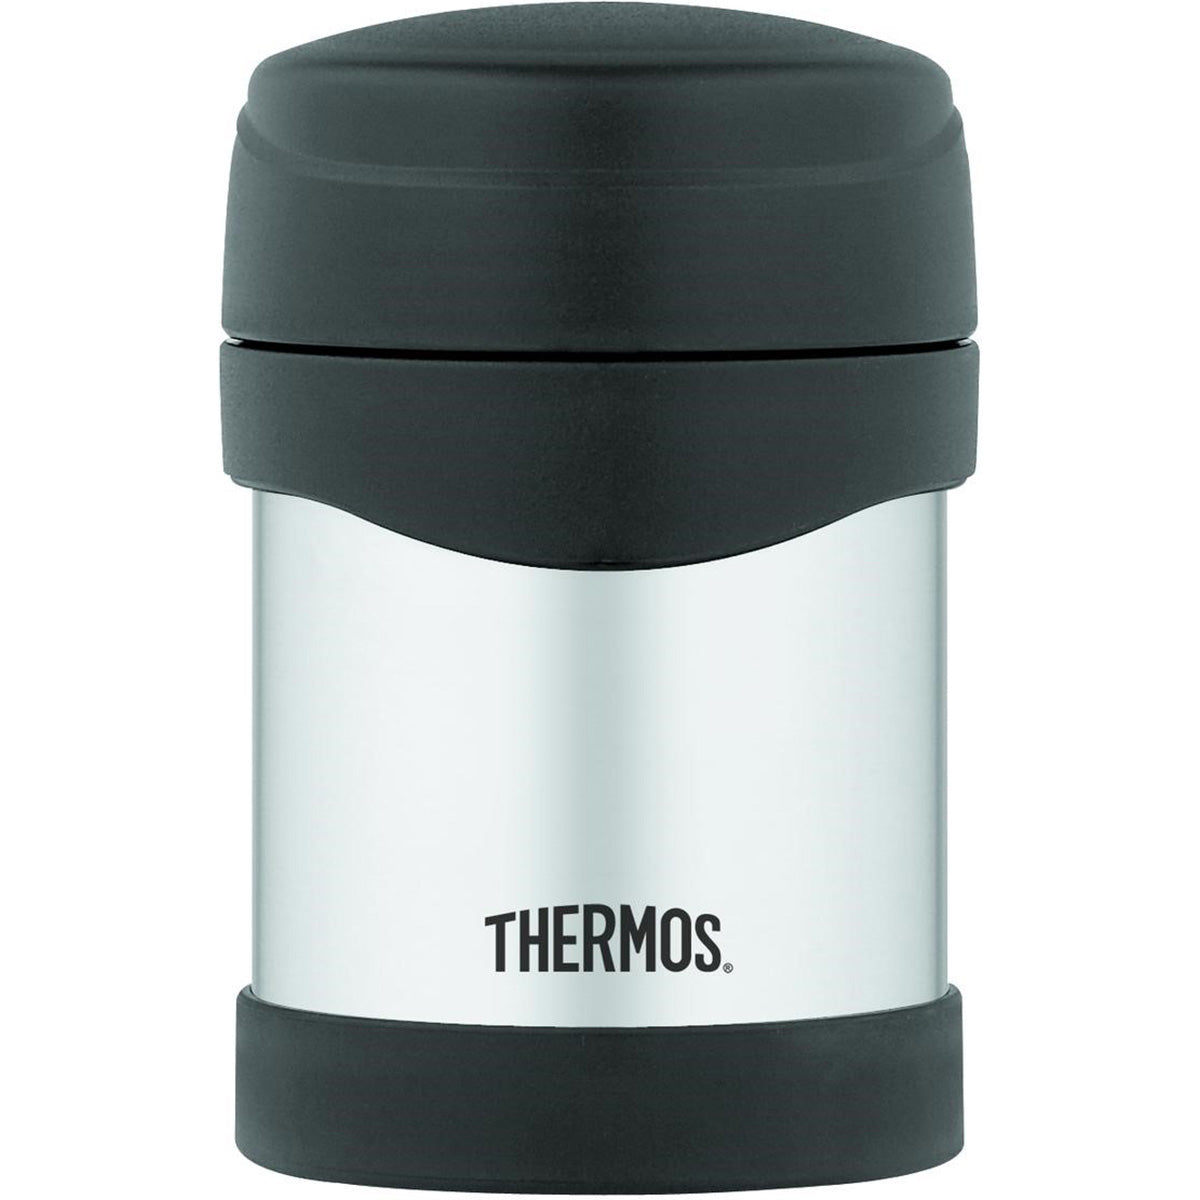 Thermos 10 oz. Vacuum Insulated Stainless Steel Food Jar - Silver Thermos